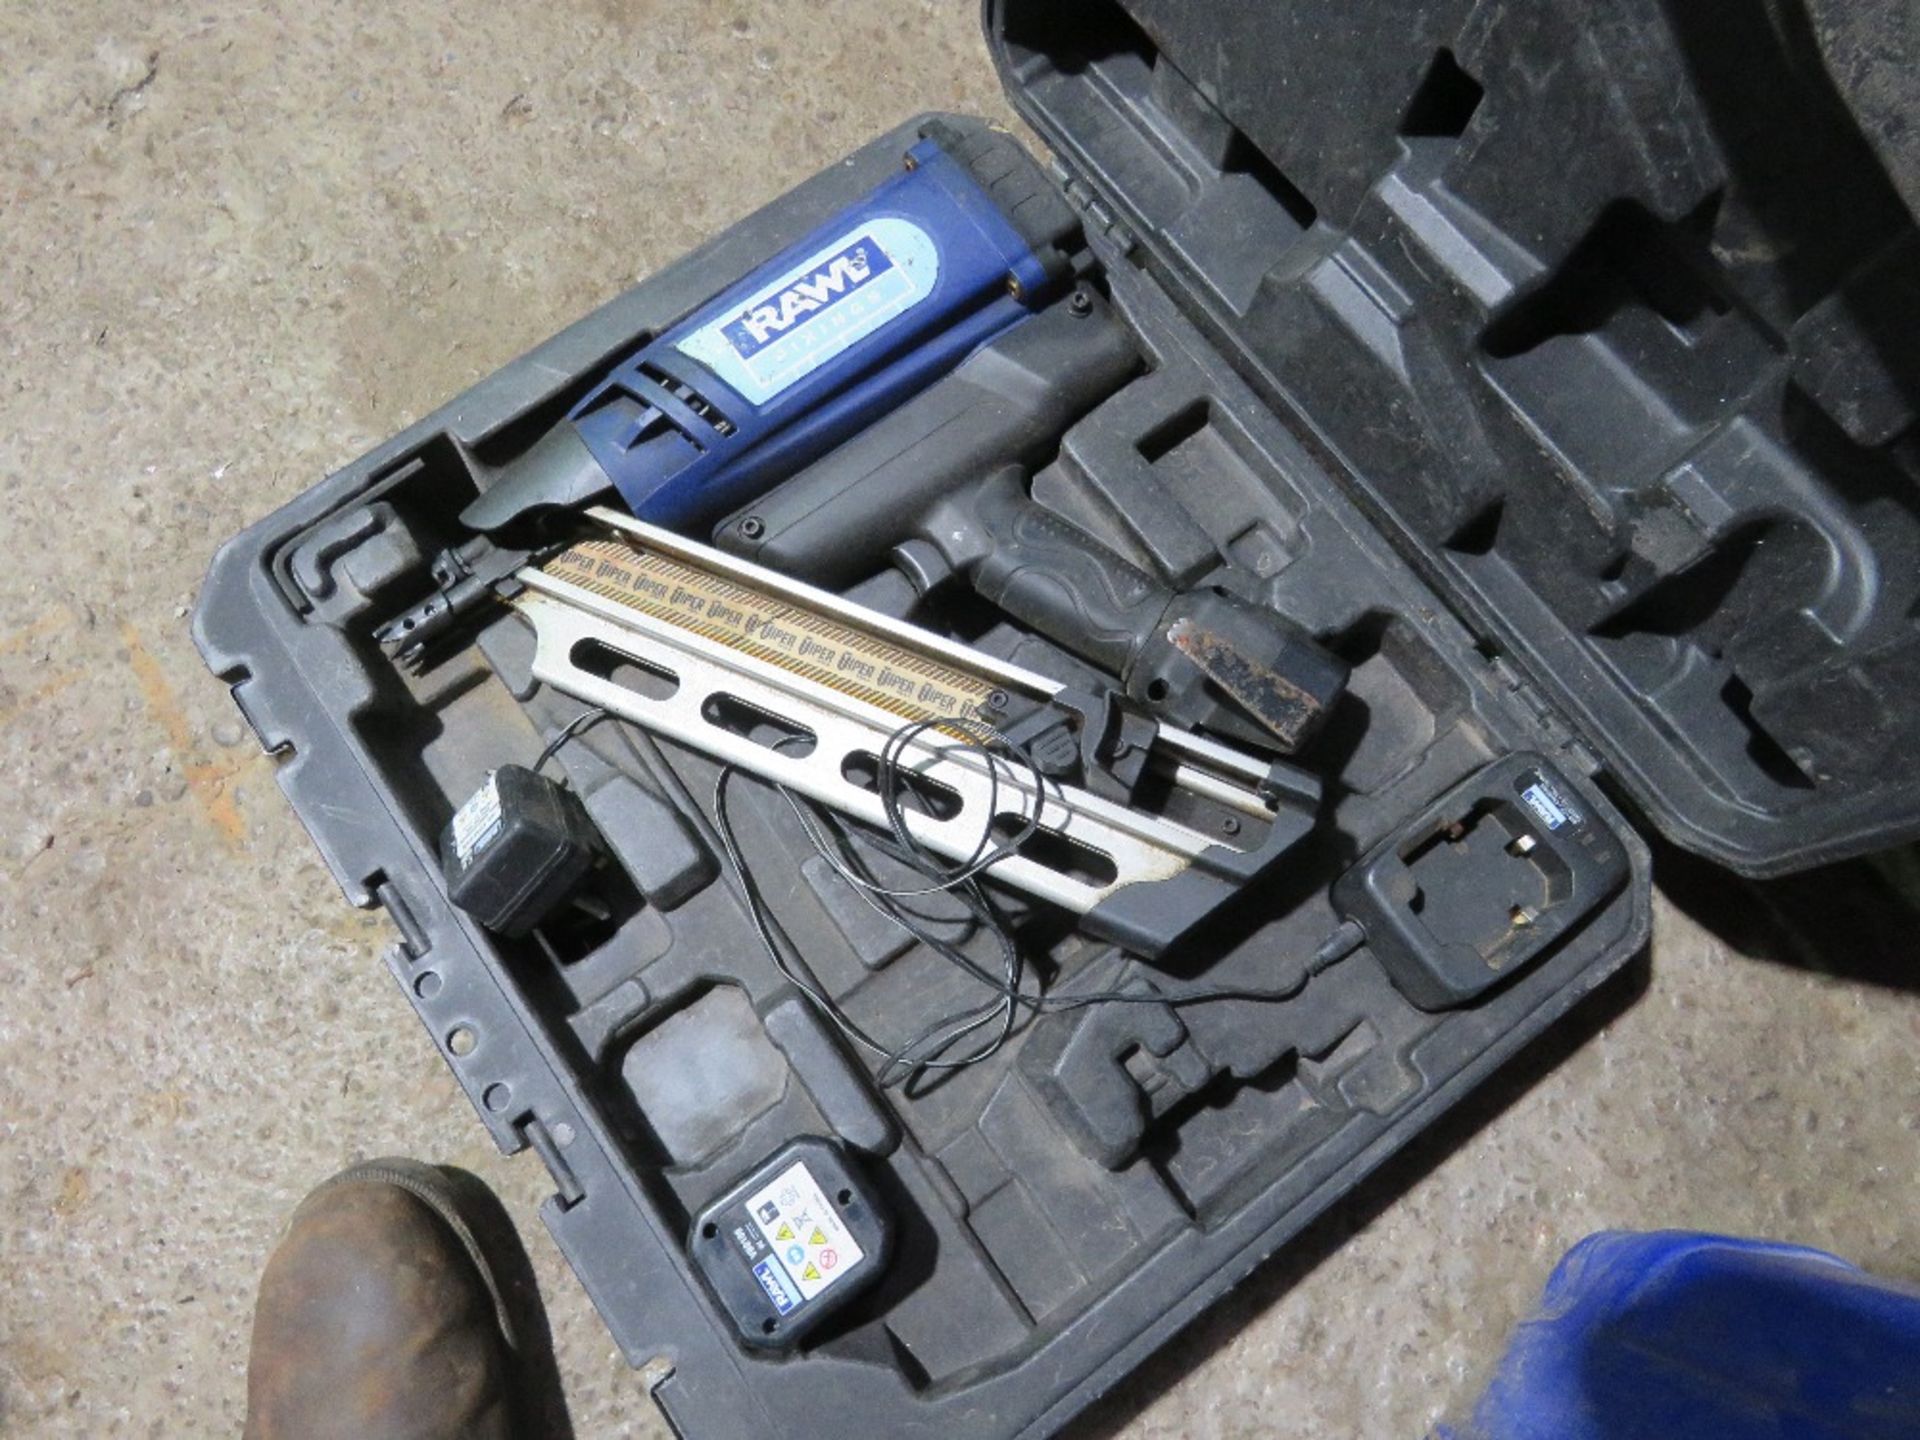 RAWL BATTERY NAIL GUN IN A CASE. THIS LOT IS SOLD UNDER THE AUCTIONEERS MARGIN SCHEME, THEREFORE